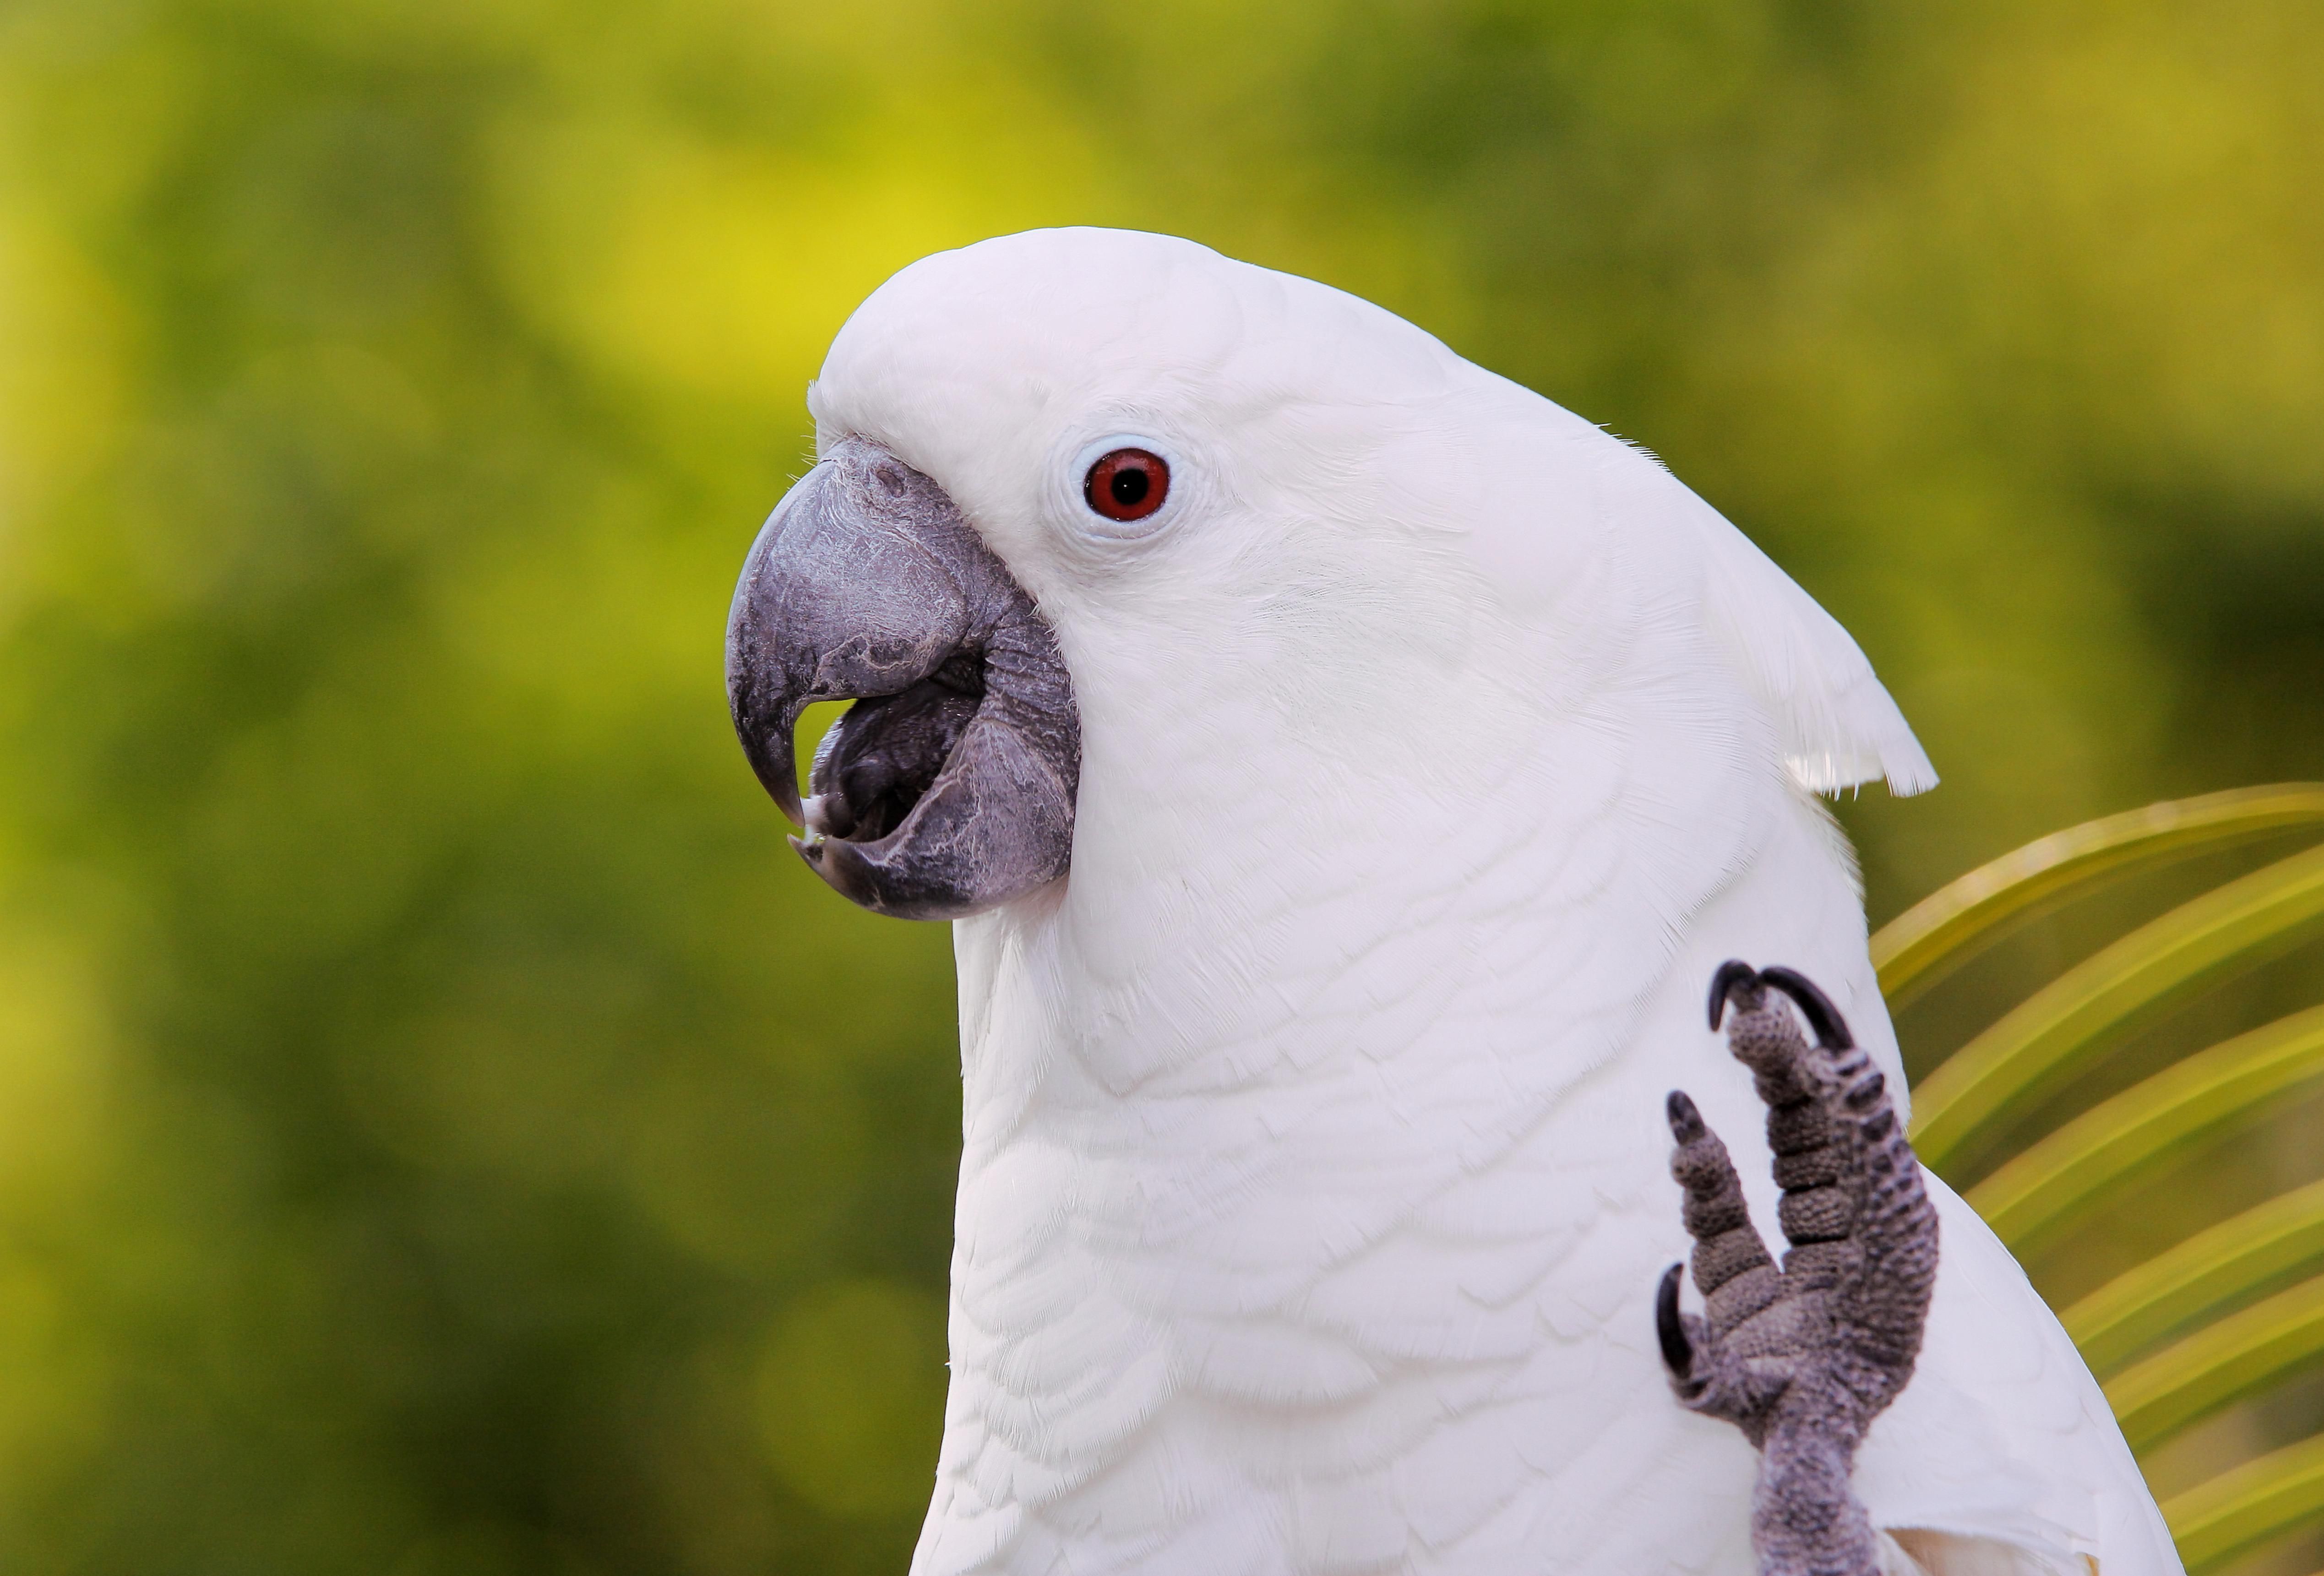 Geelong's Nakia Cockatoo has a thing, or two, to learn